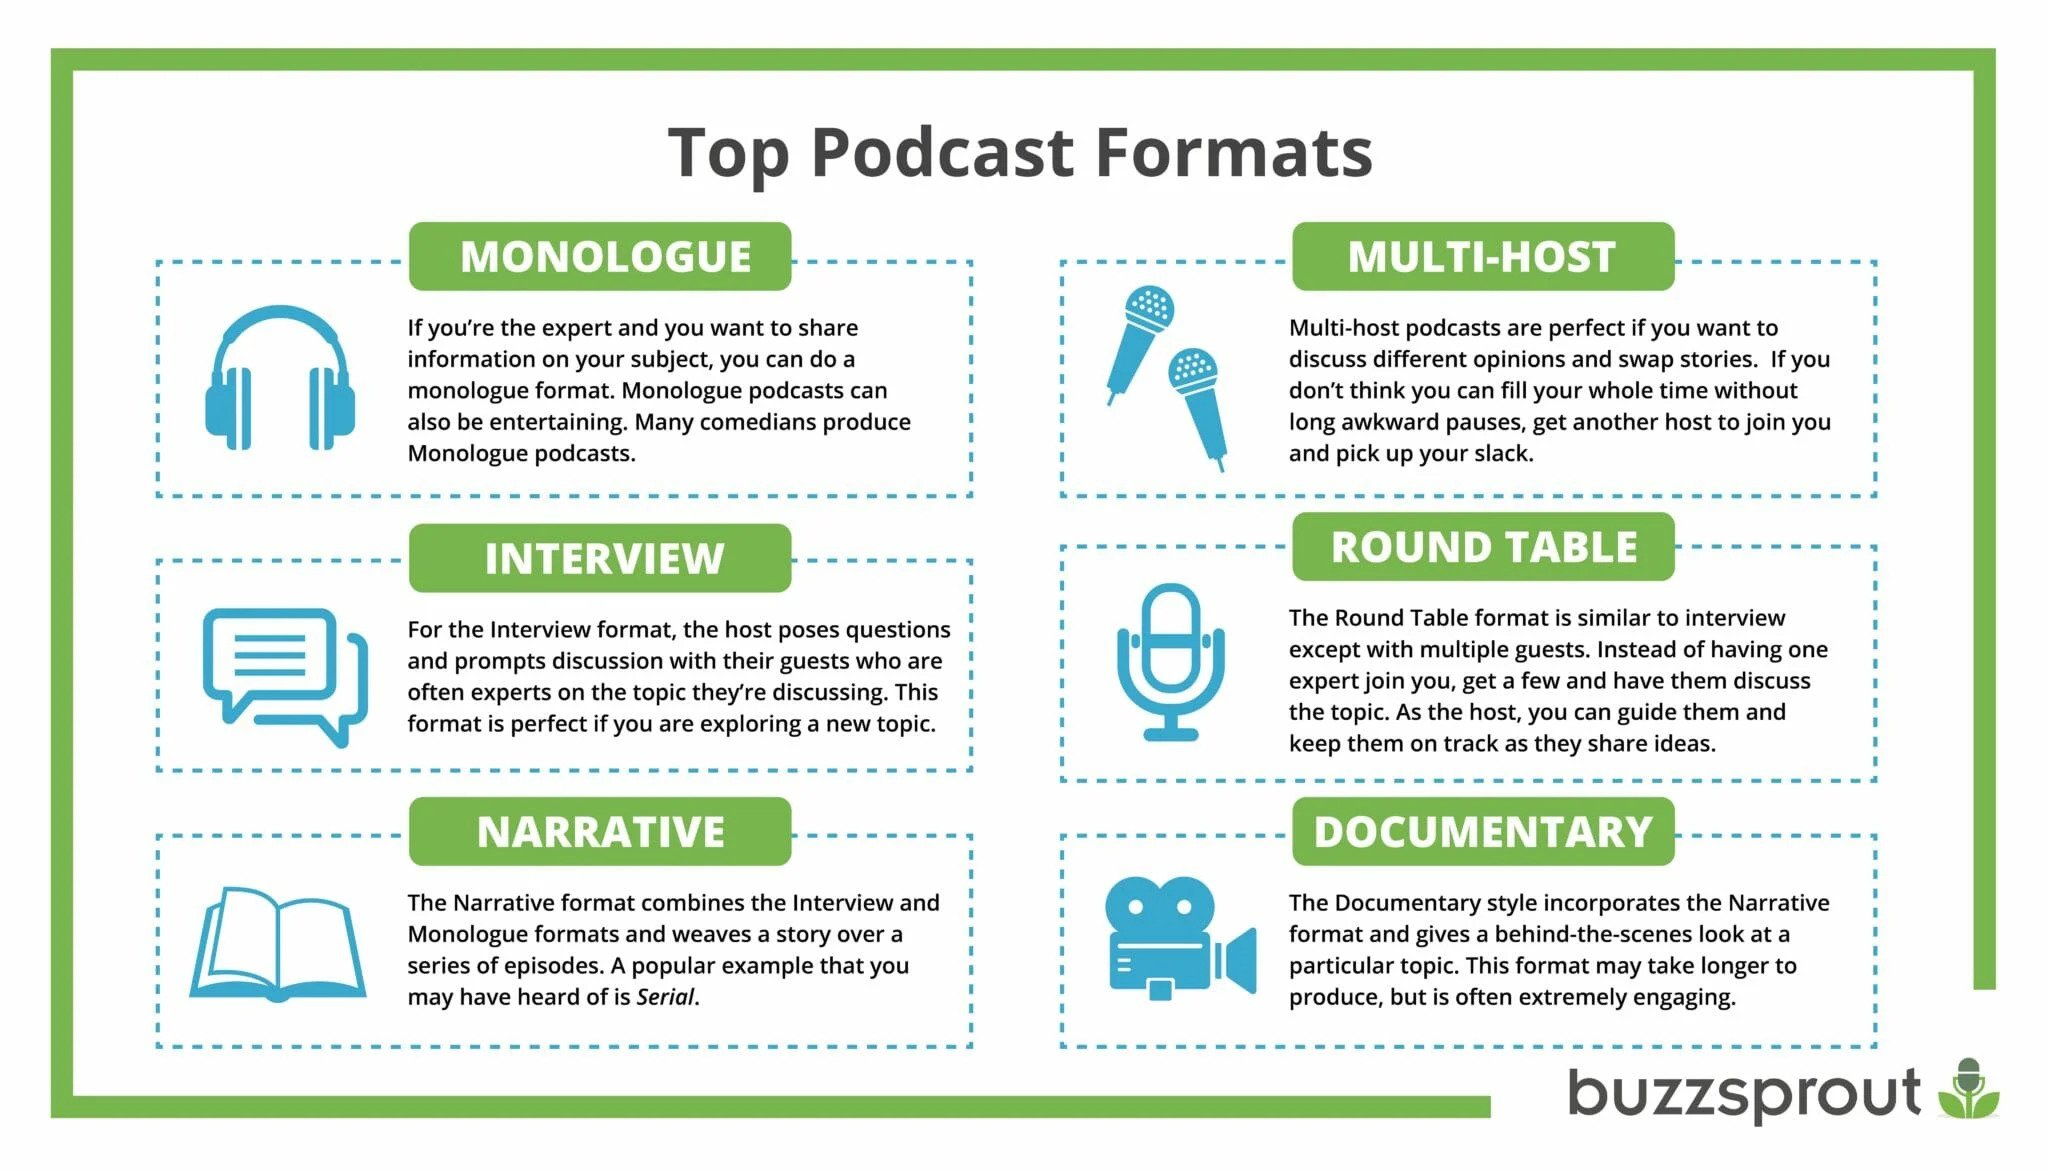 Image contains examples of the 6 most popular podcast formats of 2020